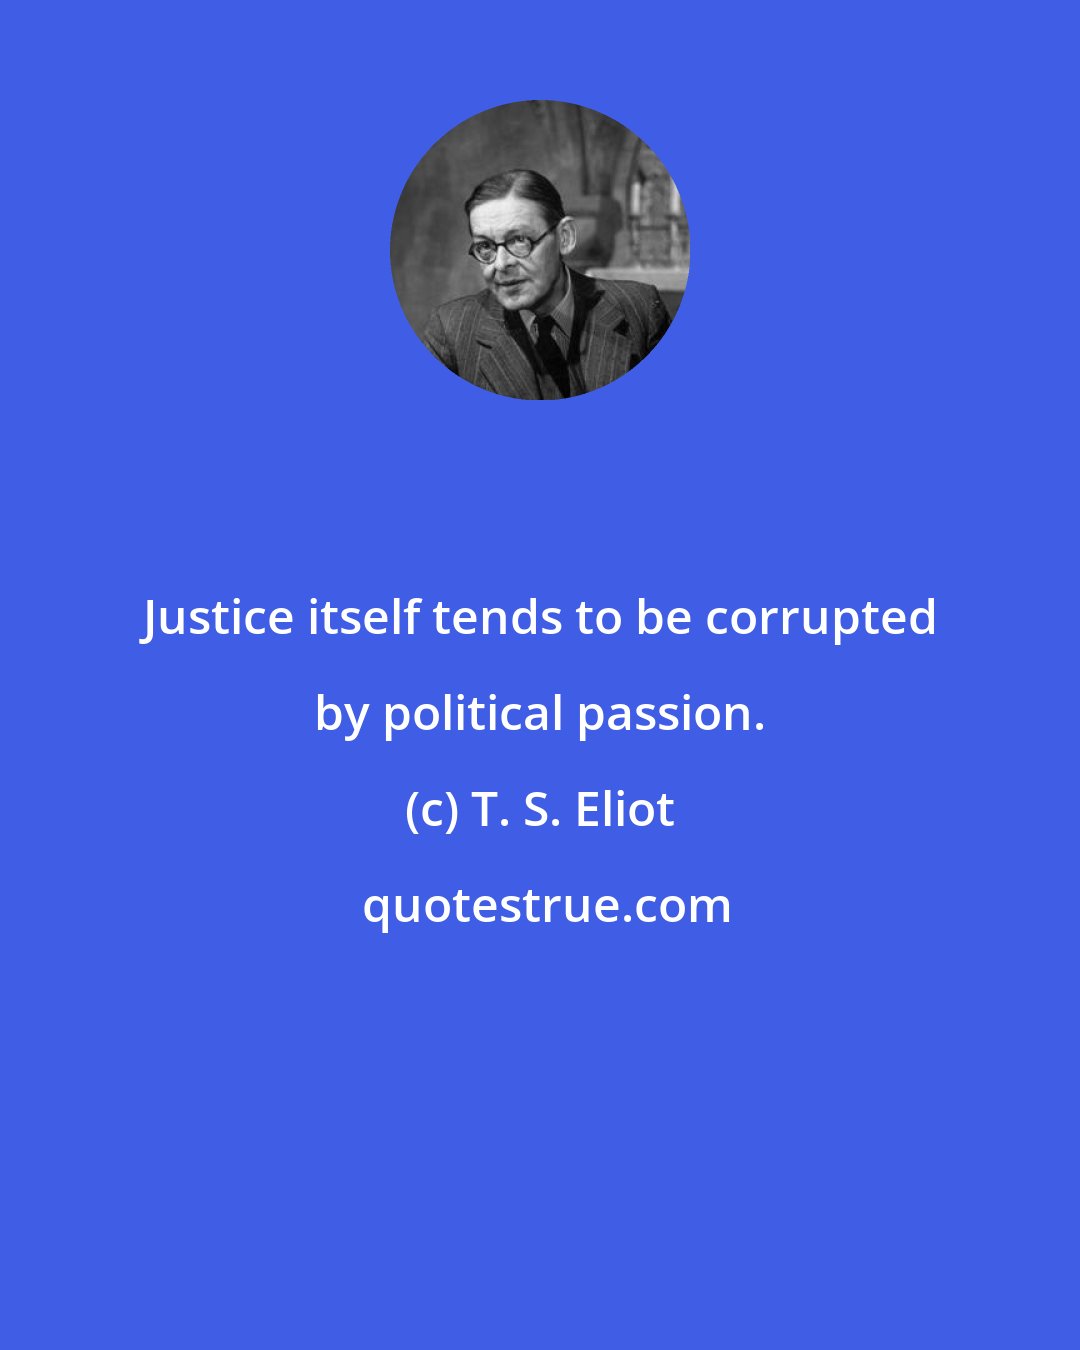 T. S. Eliot: Justice itself tends to be corrupted by political passion.